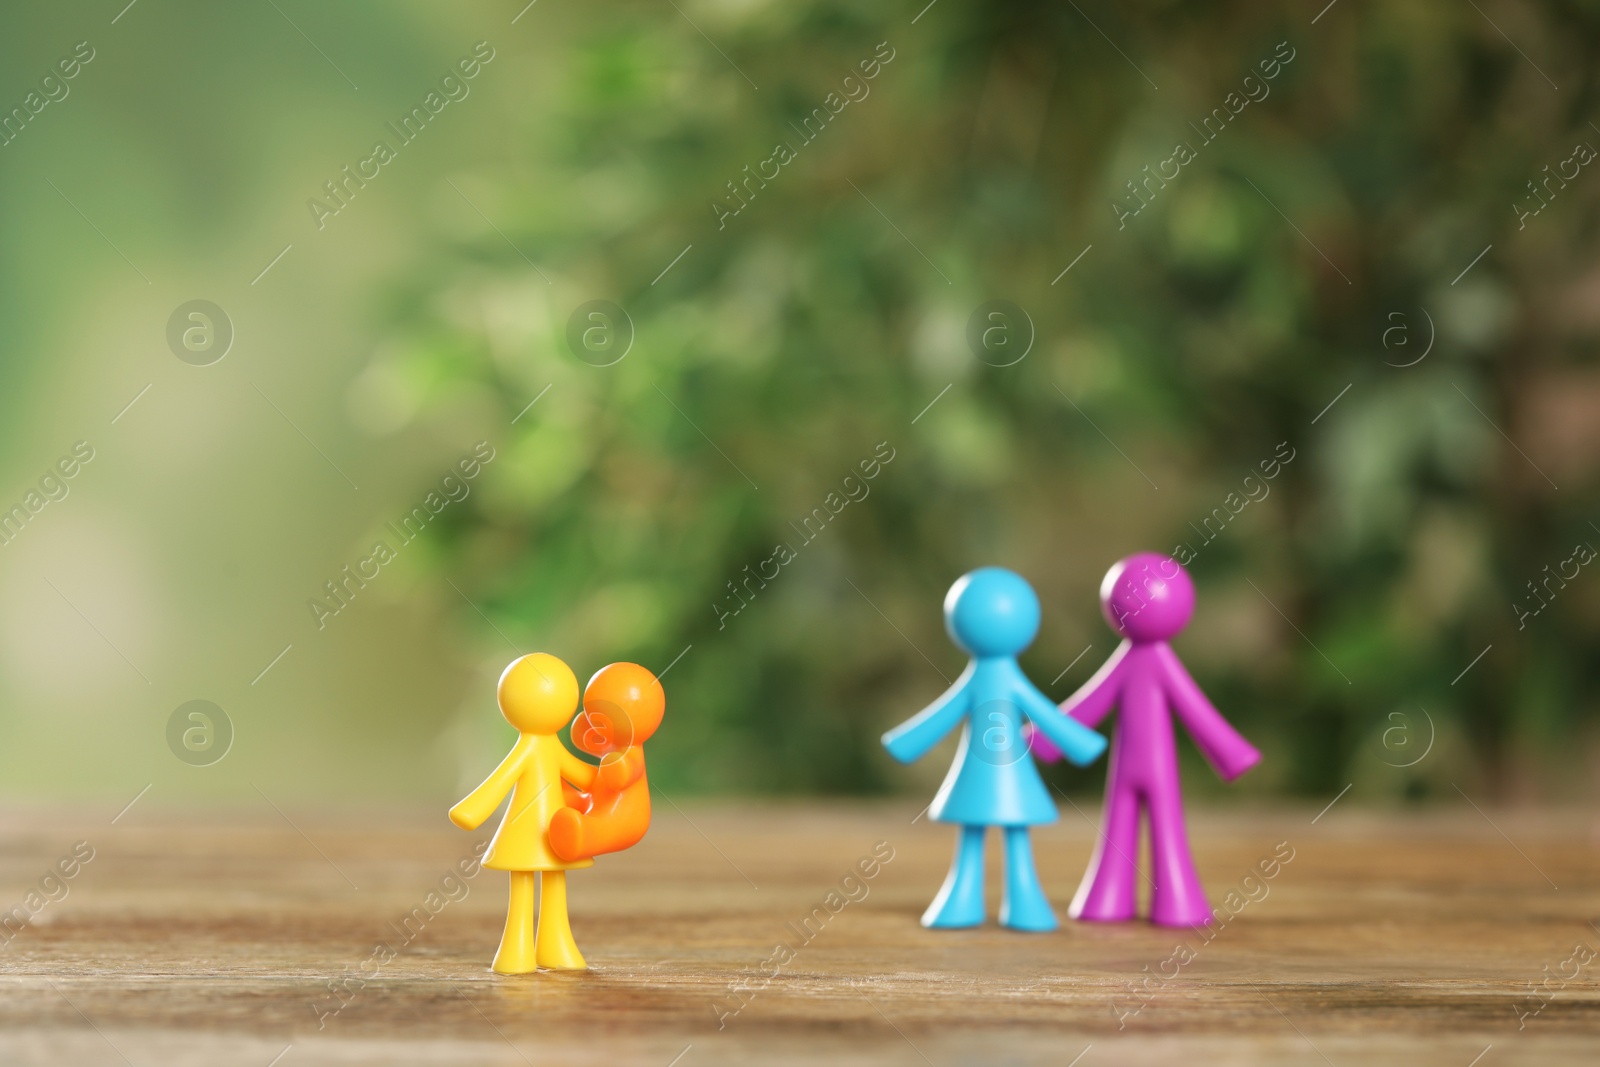 Photo of MYKOLAIV, UKRAINE - JANUARY 04, 2022: Colorful human figures on wooden table against blurred green background. Surrogacy concept